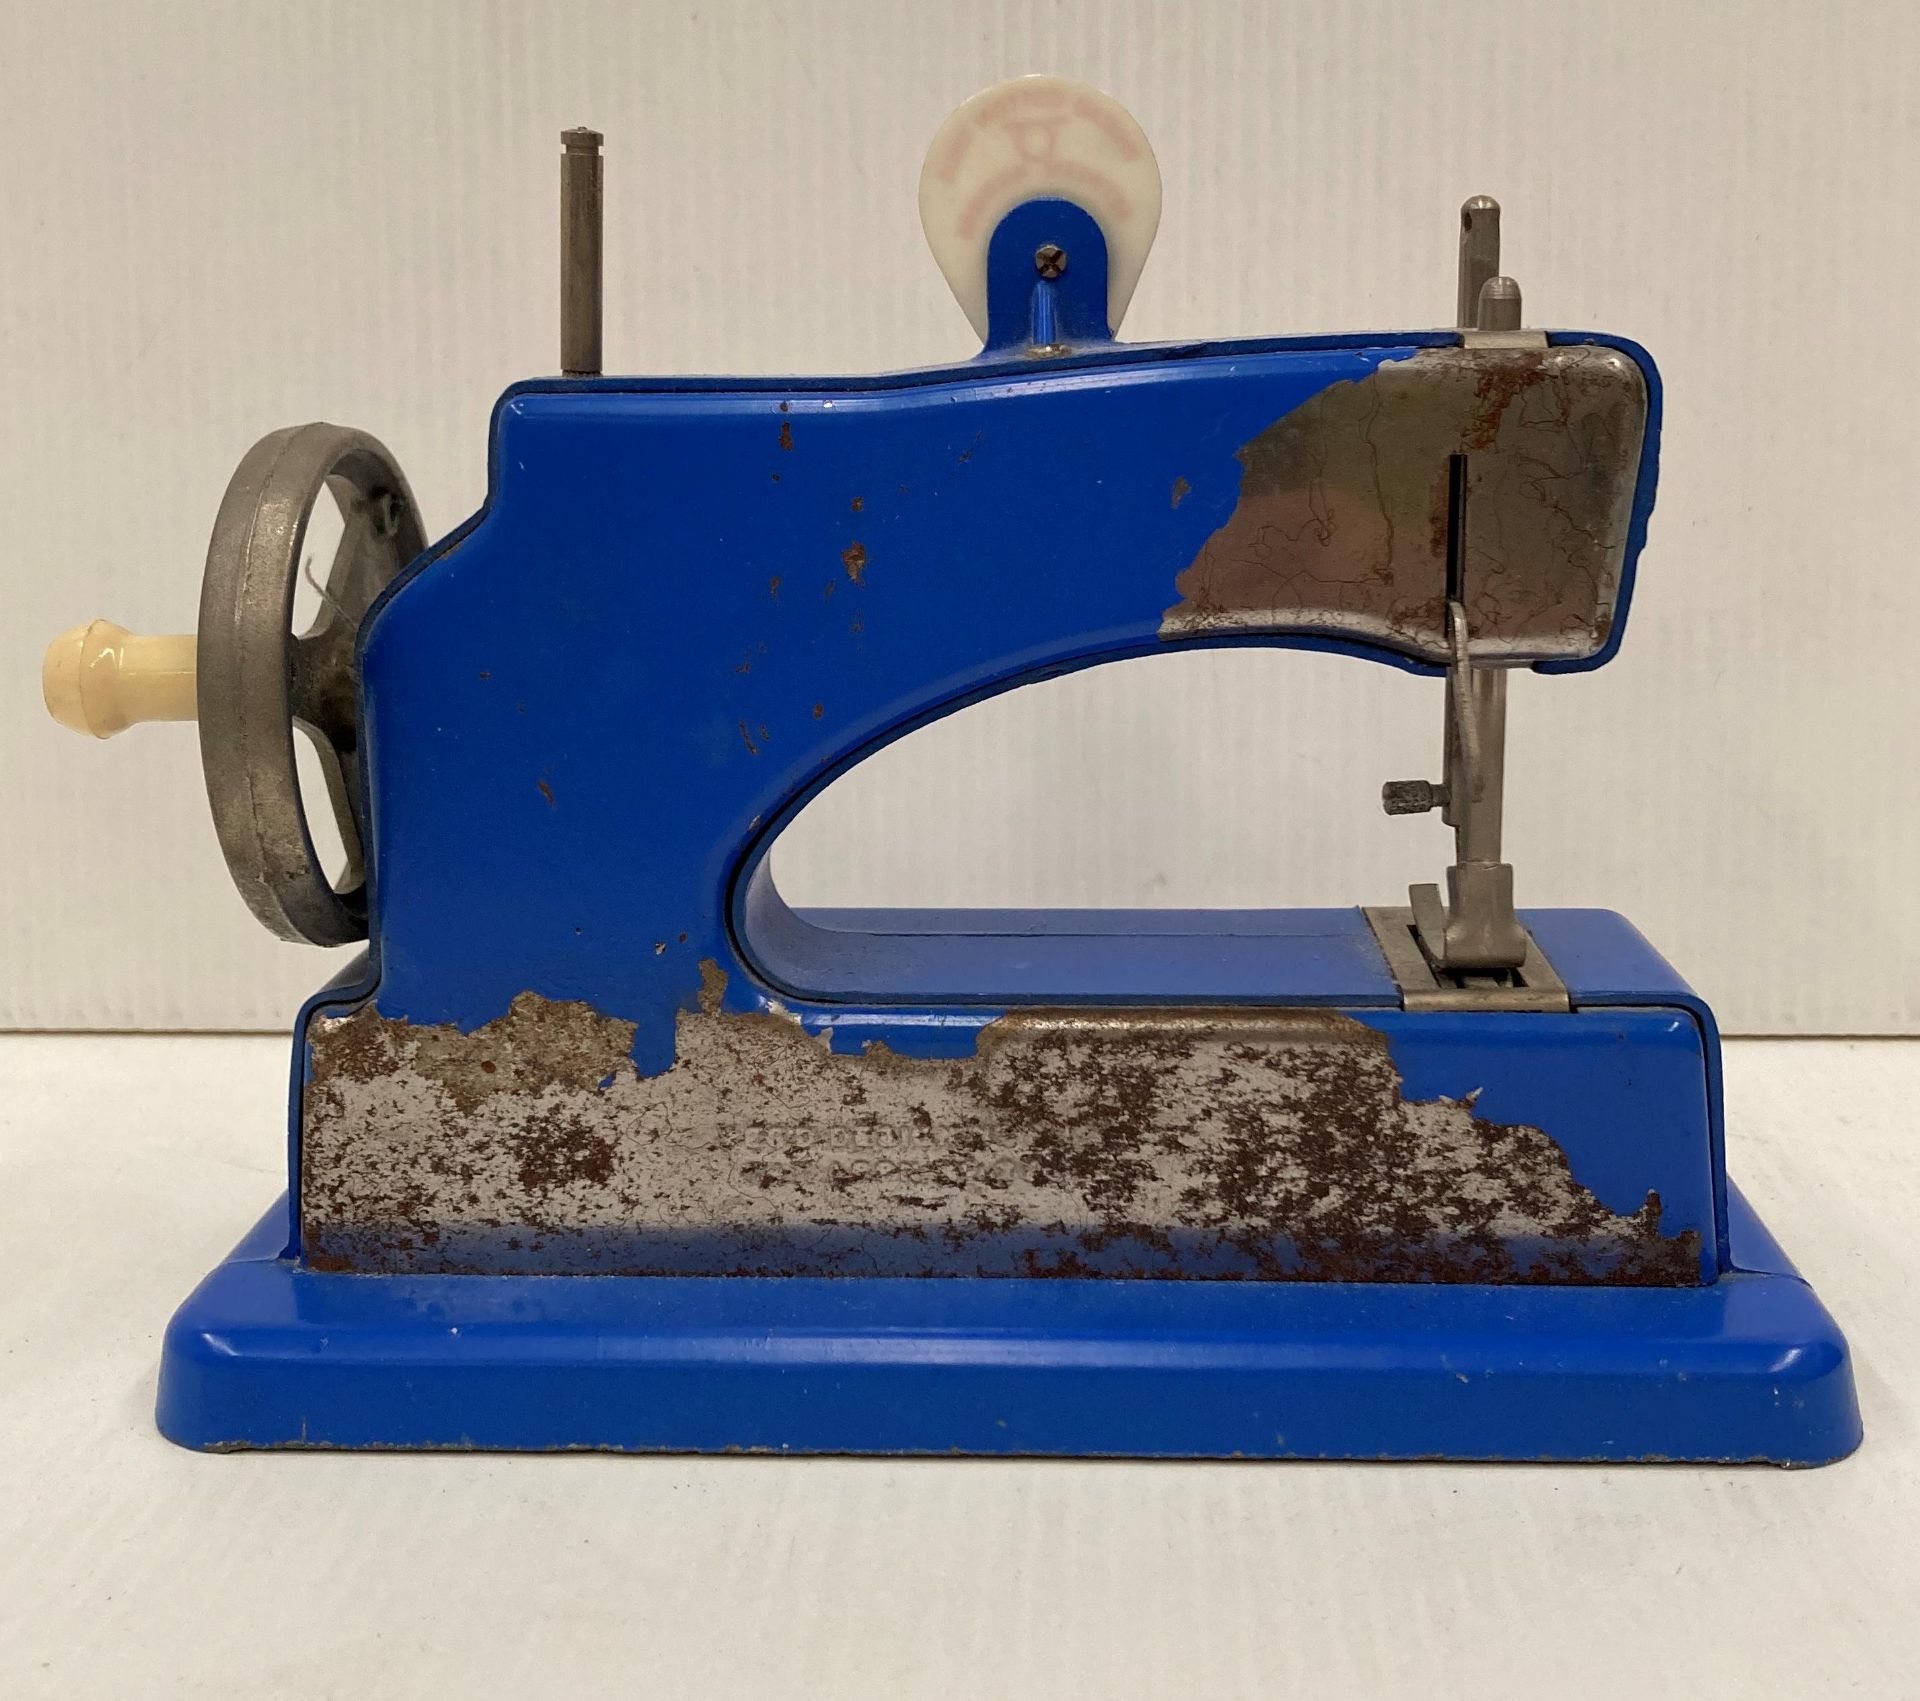 Vulcan Junior cast metal toy sewing machine in blue (S1T2) - Image 3 of 3